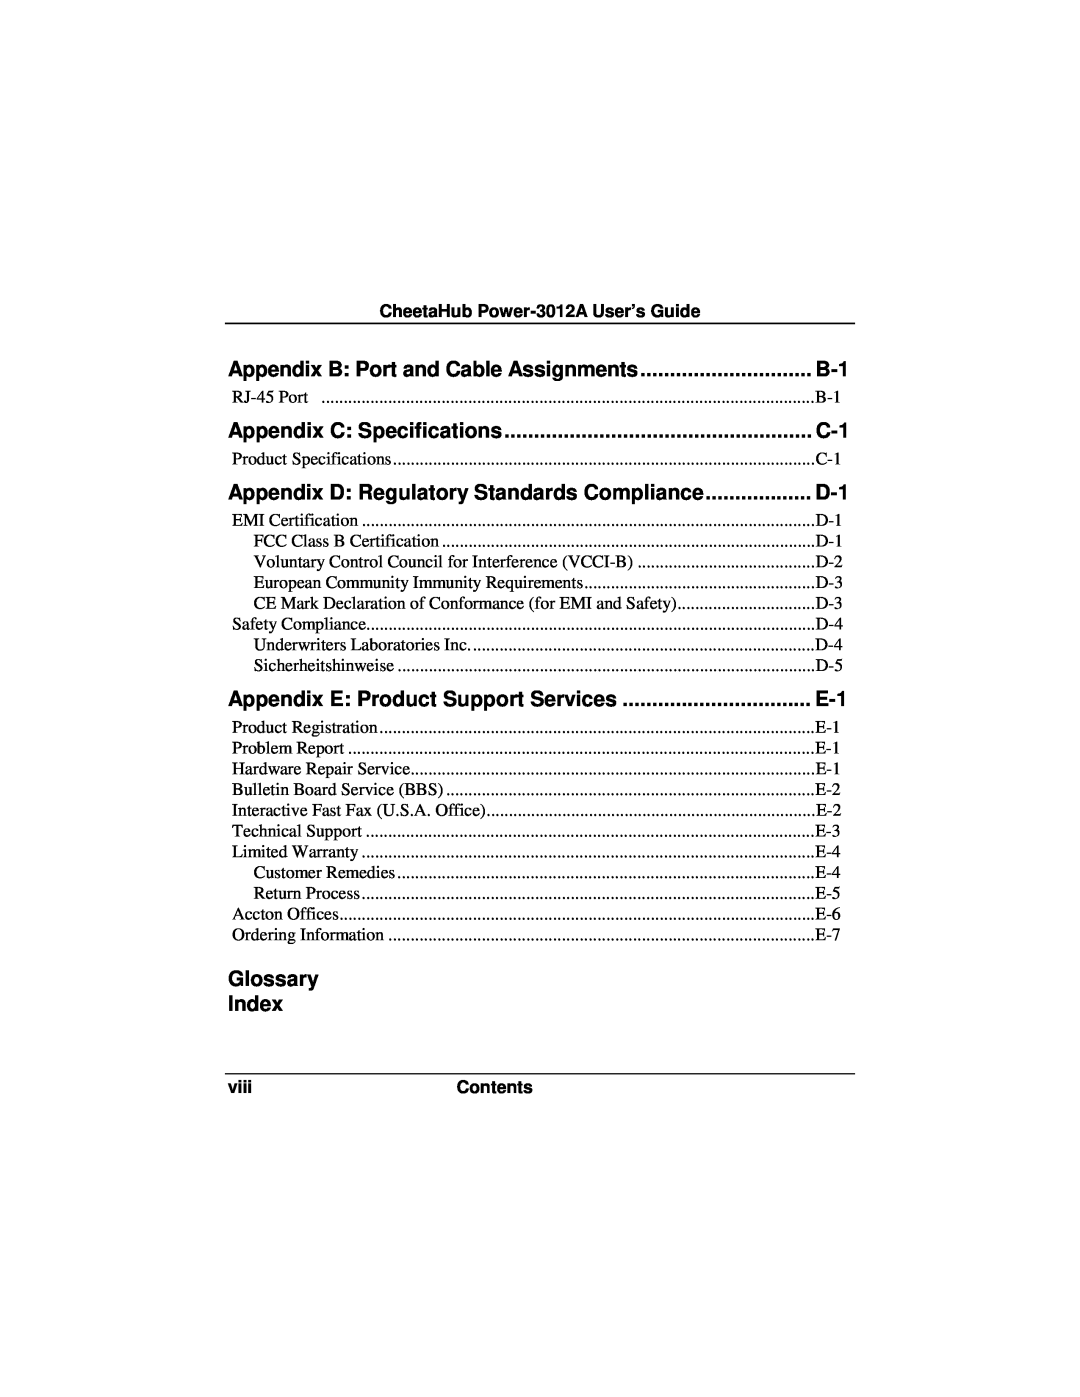 Accton Technology POWER-3012A manual Appendix B Port and Cable Assignments 